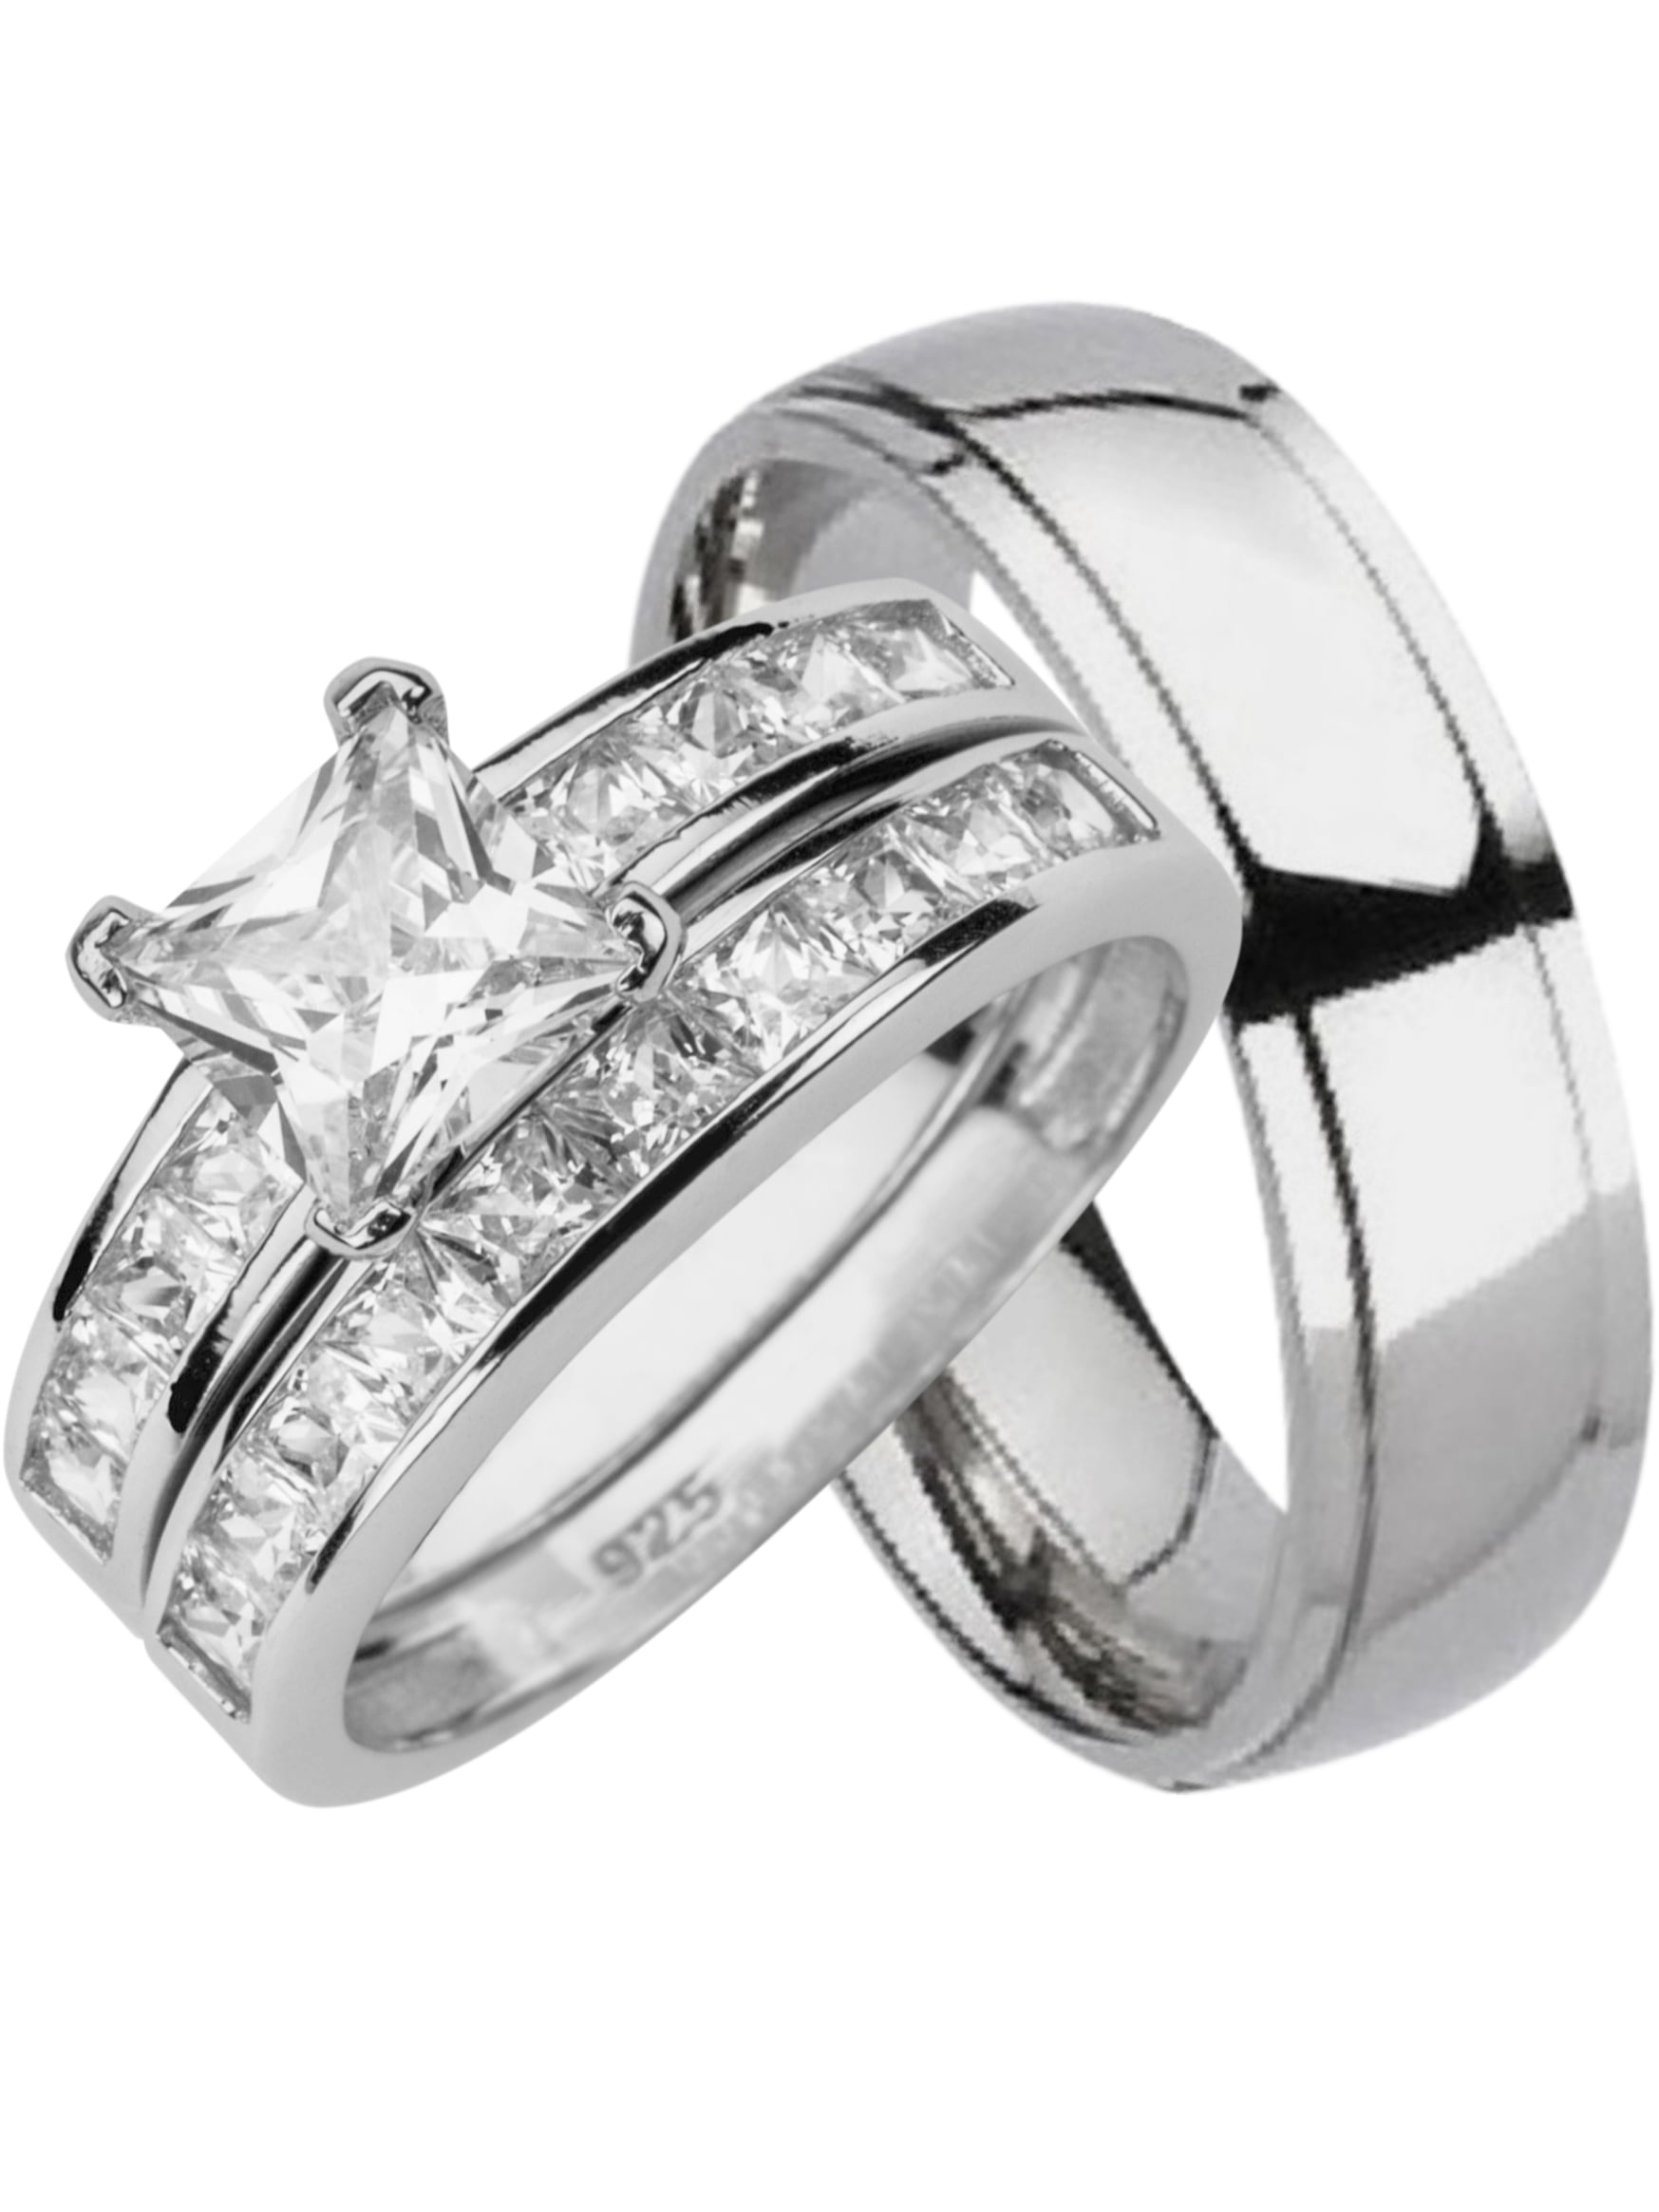 LaRaso Co His and Hers Matching Wedding  Ring  Sets 